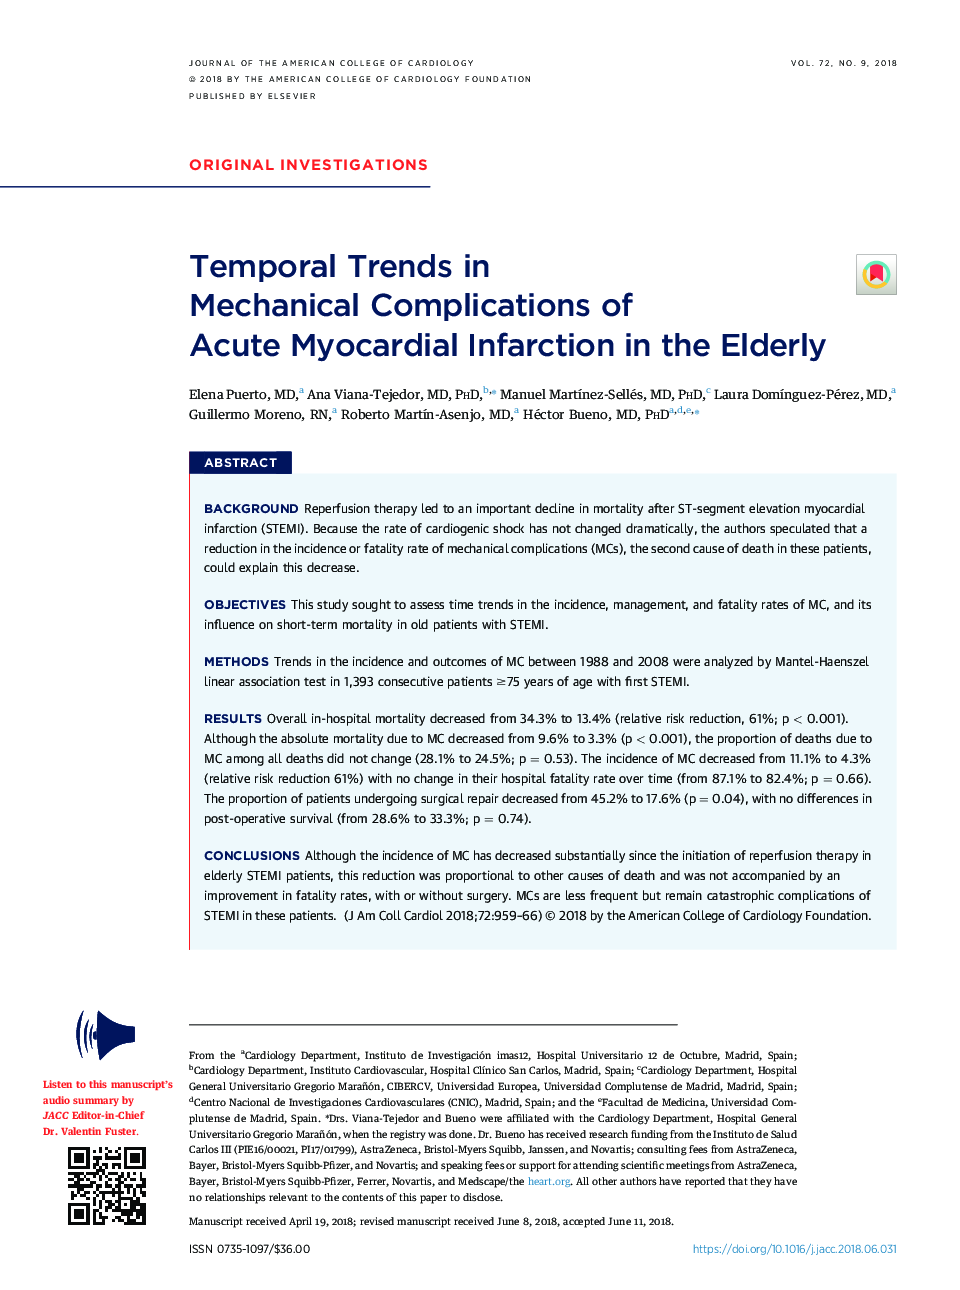 Temporal Trends in MechanicalÂ Complications of AcuteÂ Myocardial Infarction in the Elderly